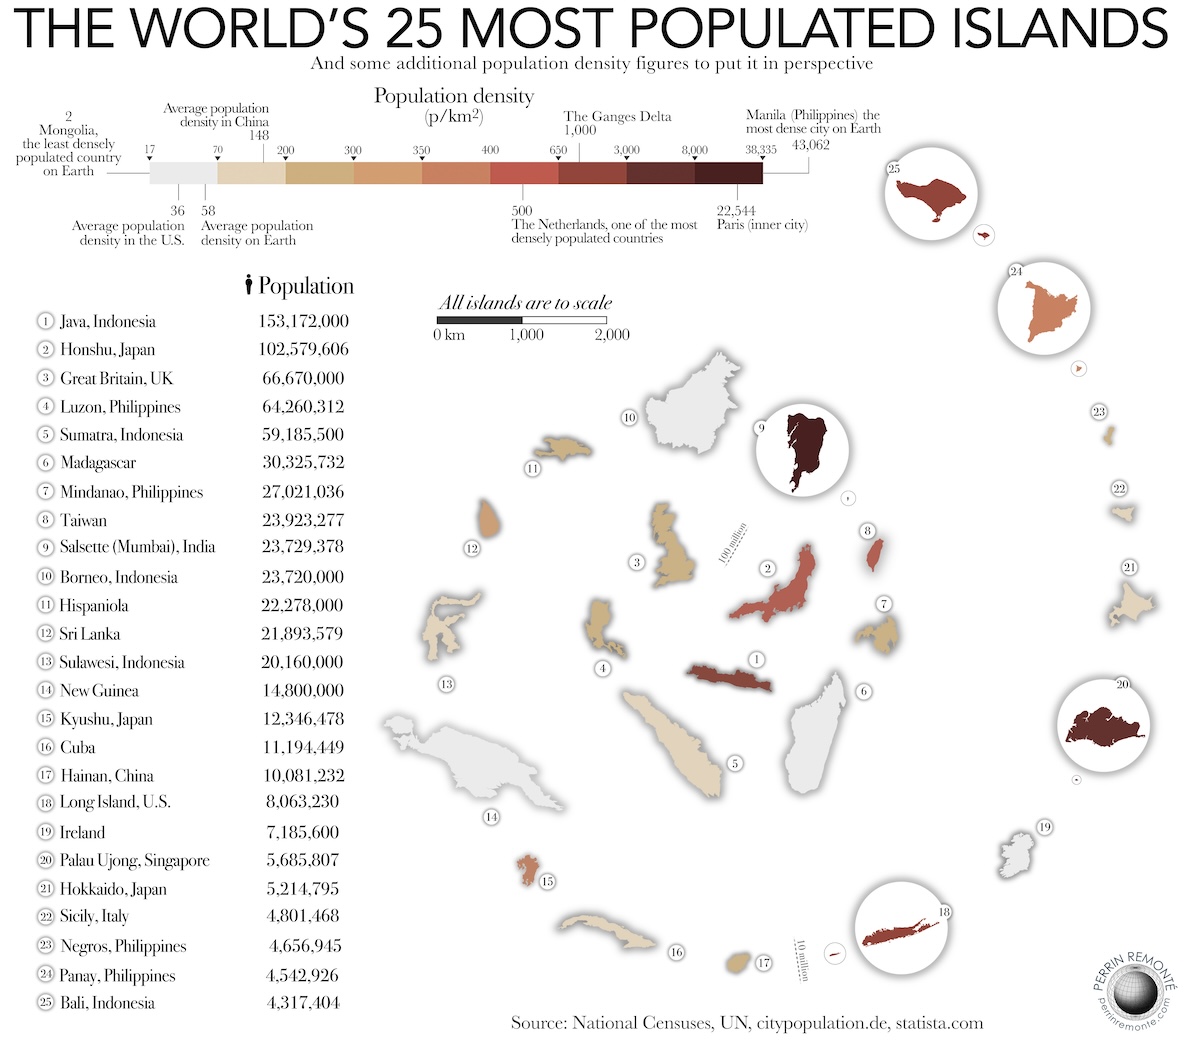 A chart ranking the 25 most populated islands on Earth, along with their area to scale.